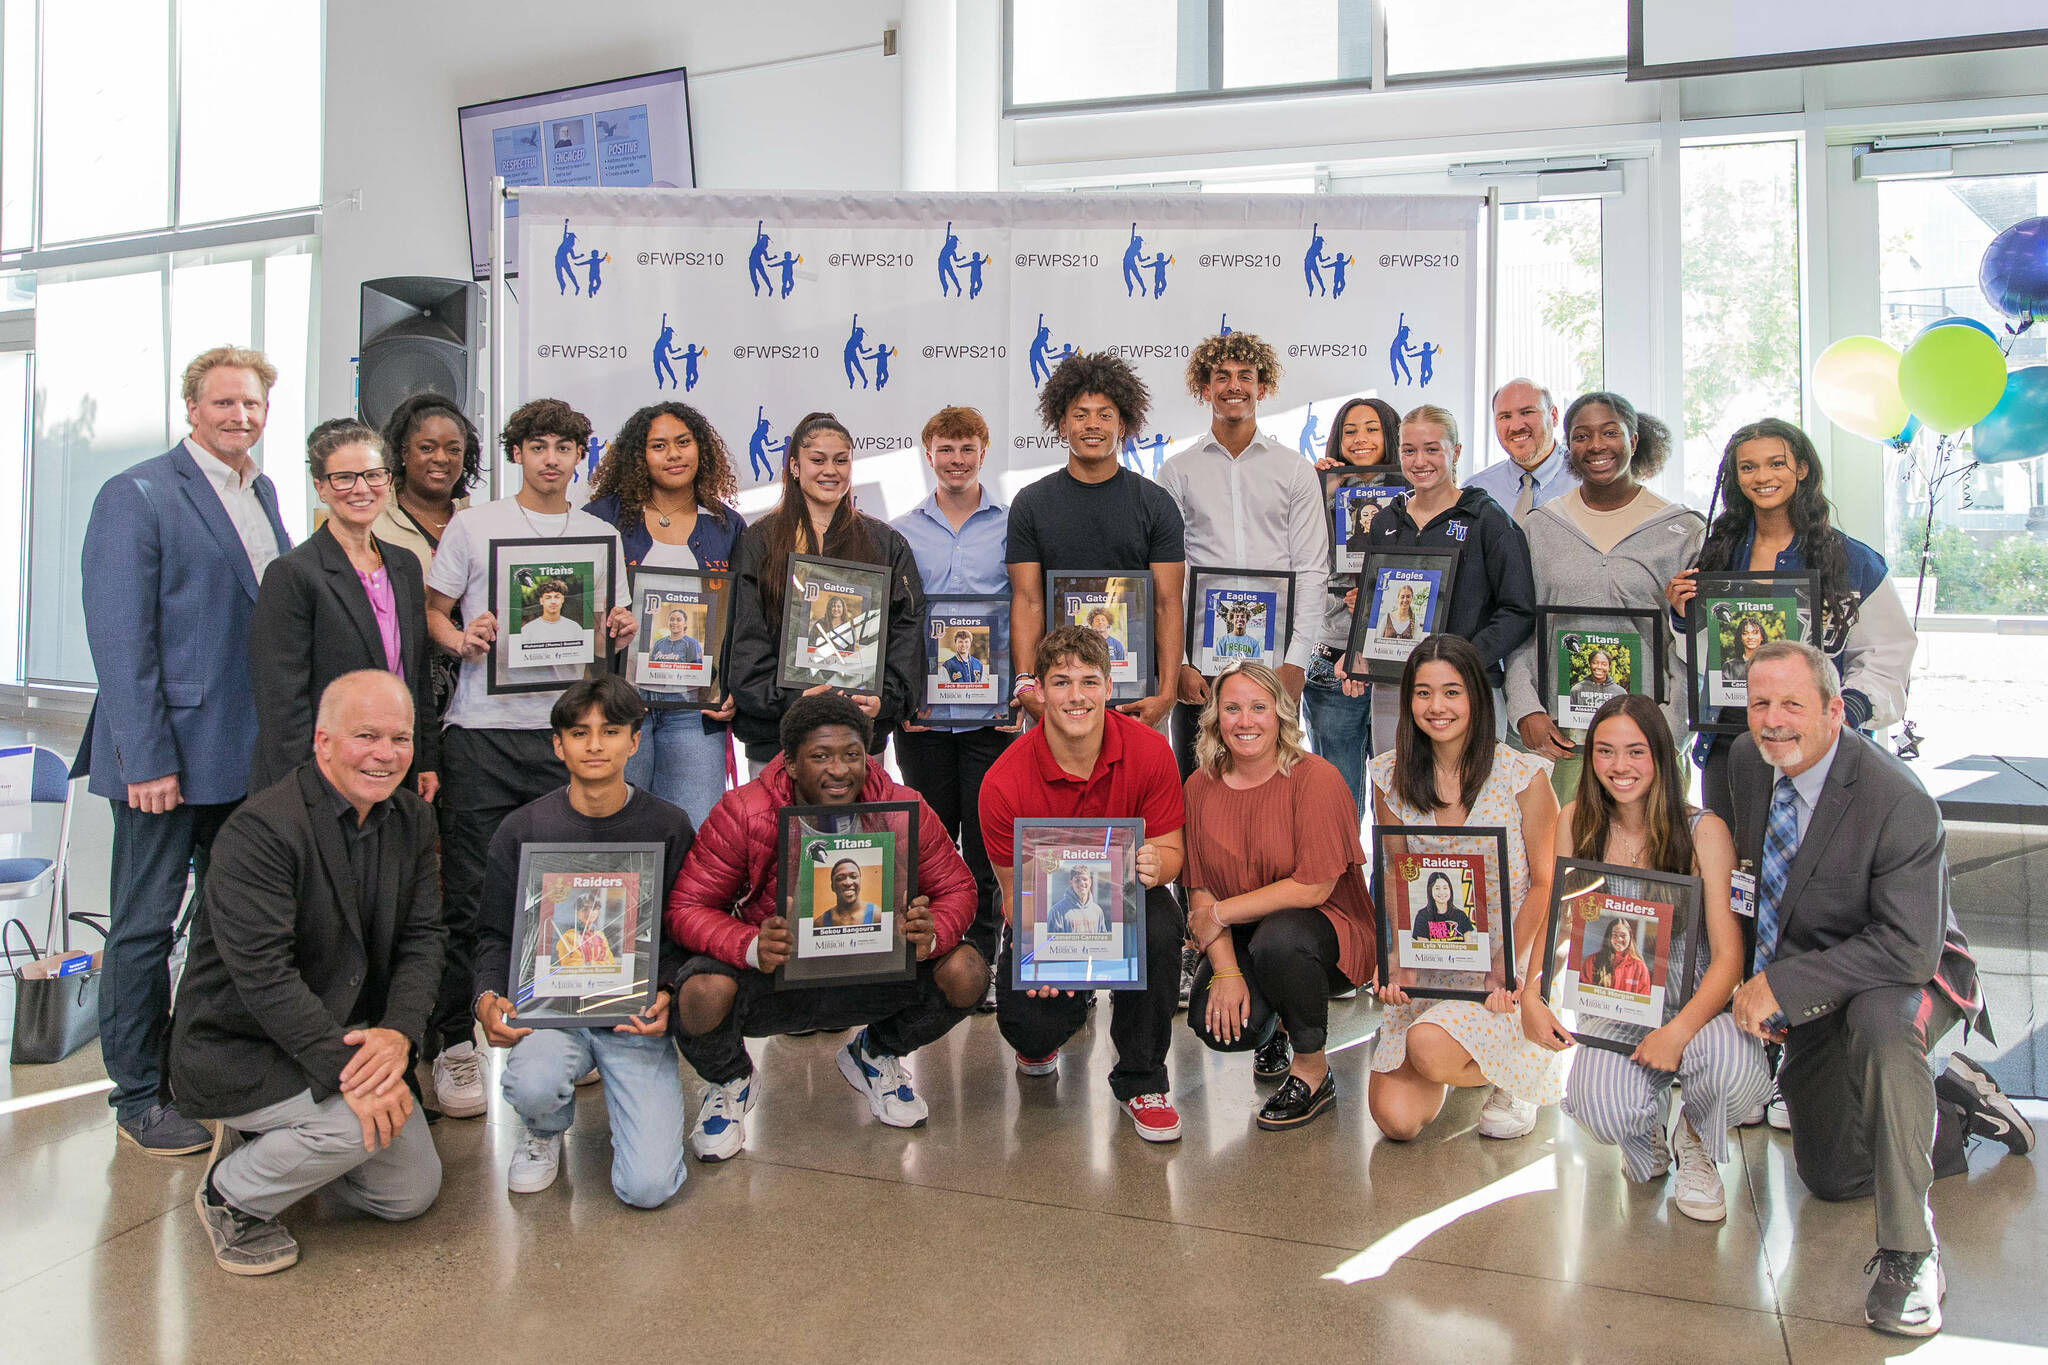 All 16 nominees from all four high schools after the awards at Federal Way High School. (Photo Provided by FWPS)